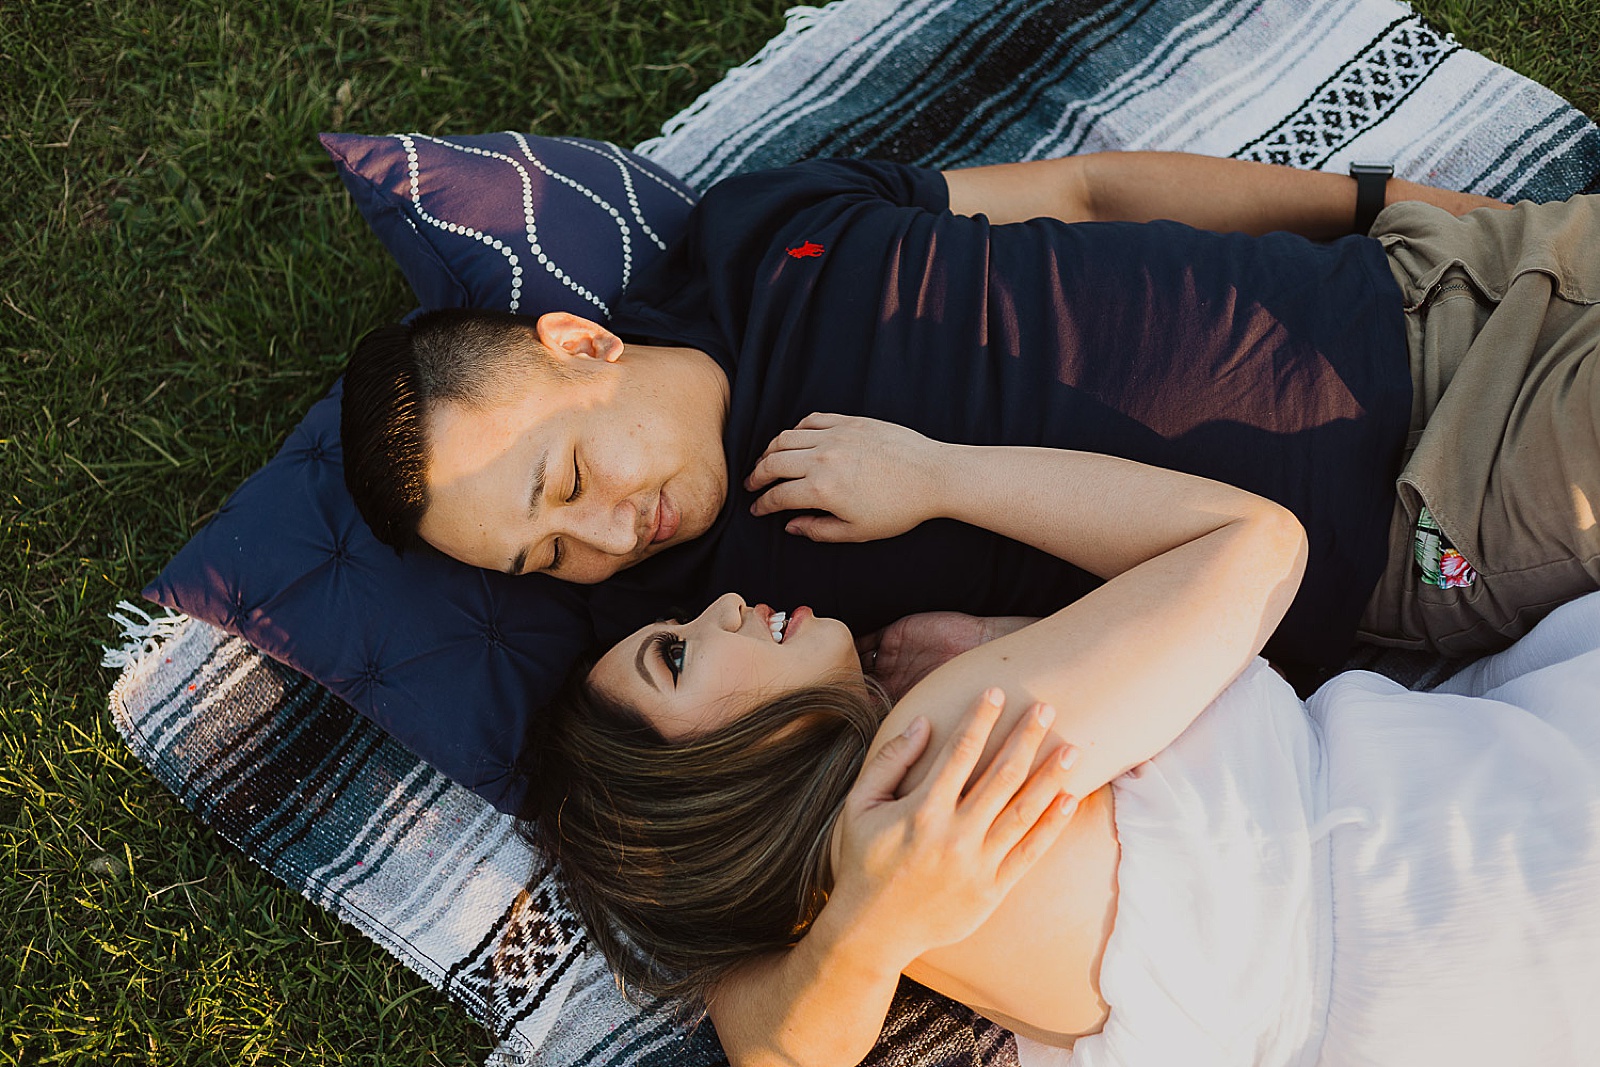 Picnic Engagement photos in Kansas City by Caitlyn Cloud Photography